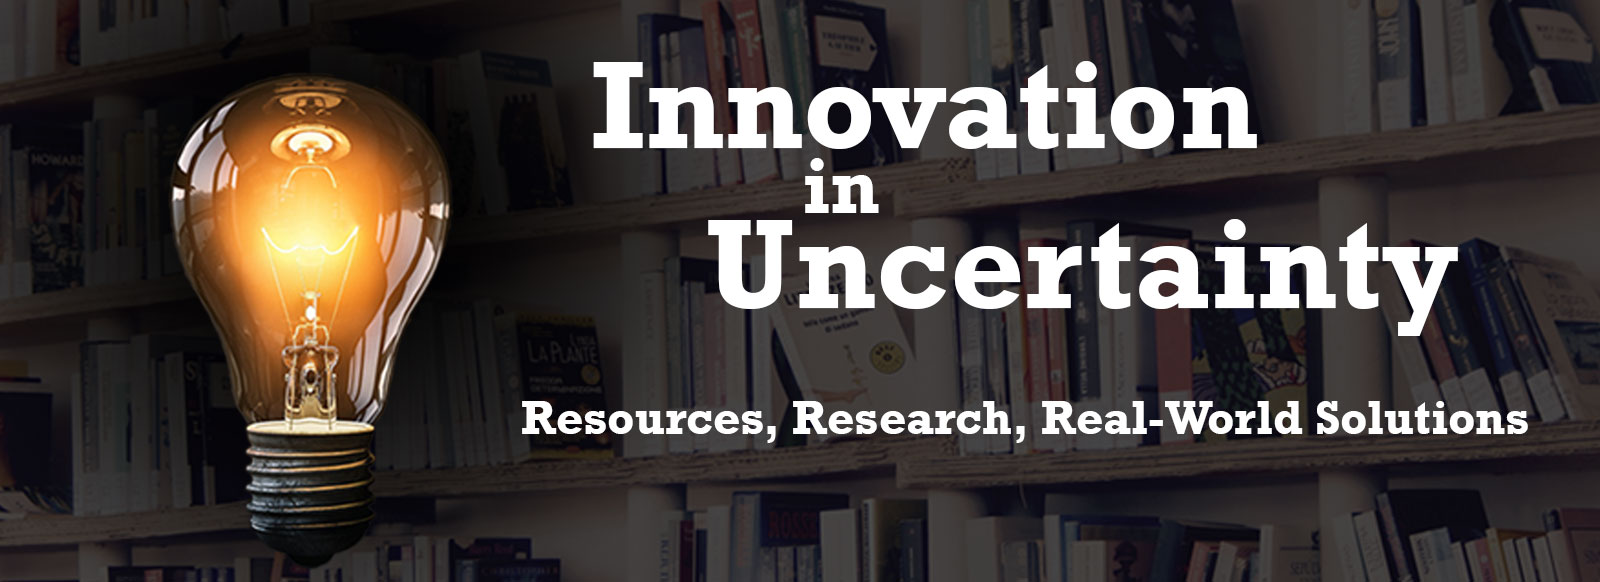 Innovation in Uncertainty: Research, Resources, Real-World Solutions